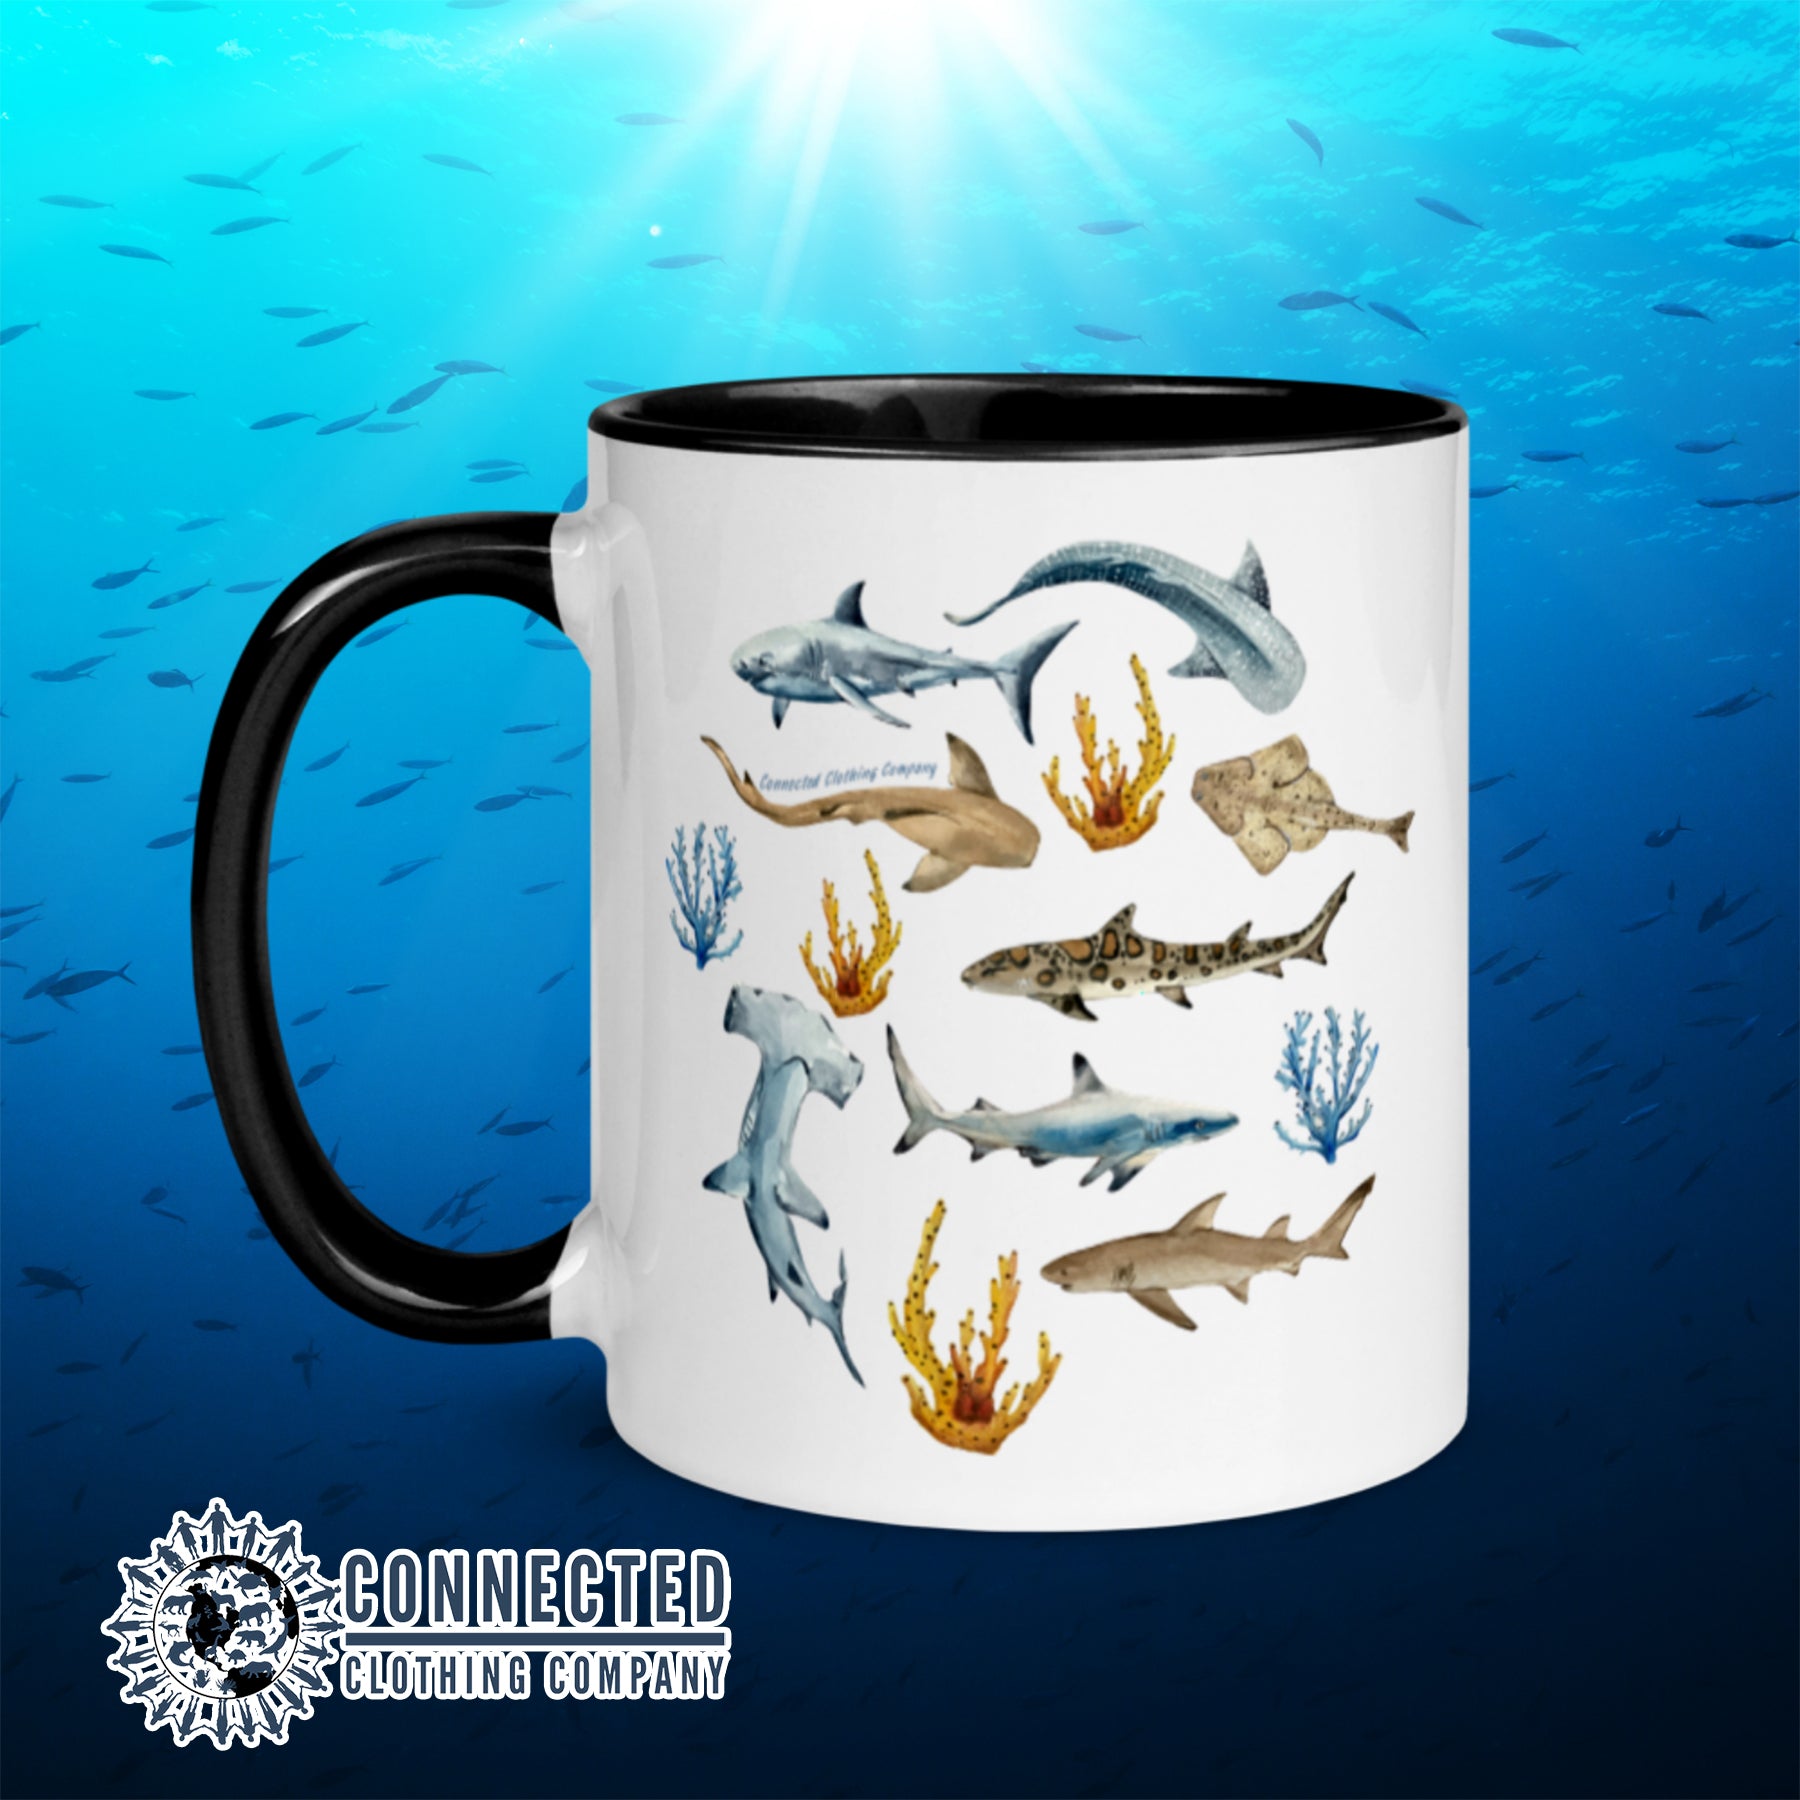 Shark Ocean Watercolor Colored Mug With Black Coloring on Inside, Rim, and Handle - sweetsherriloudesigns - Ethically and Sustainably Made - 10% donated to Oceana shark conservation